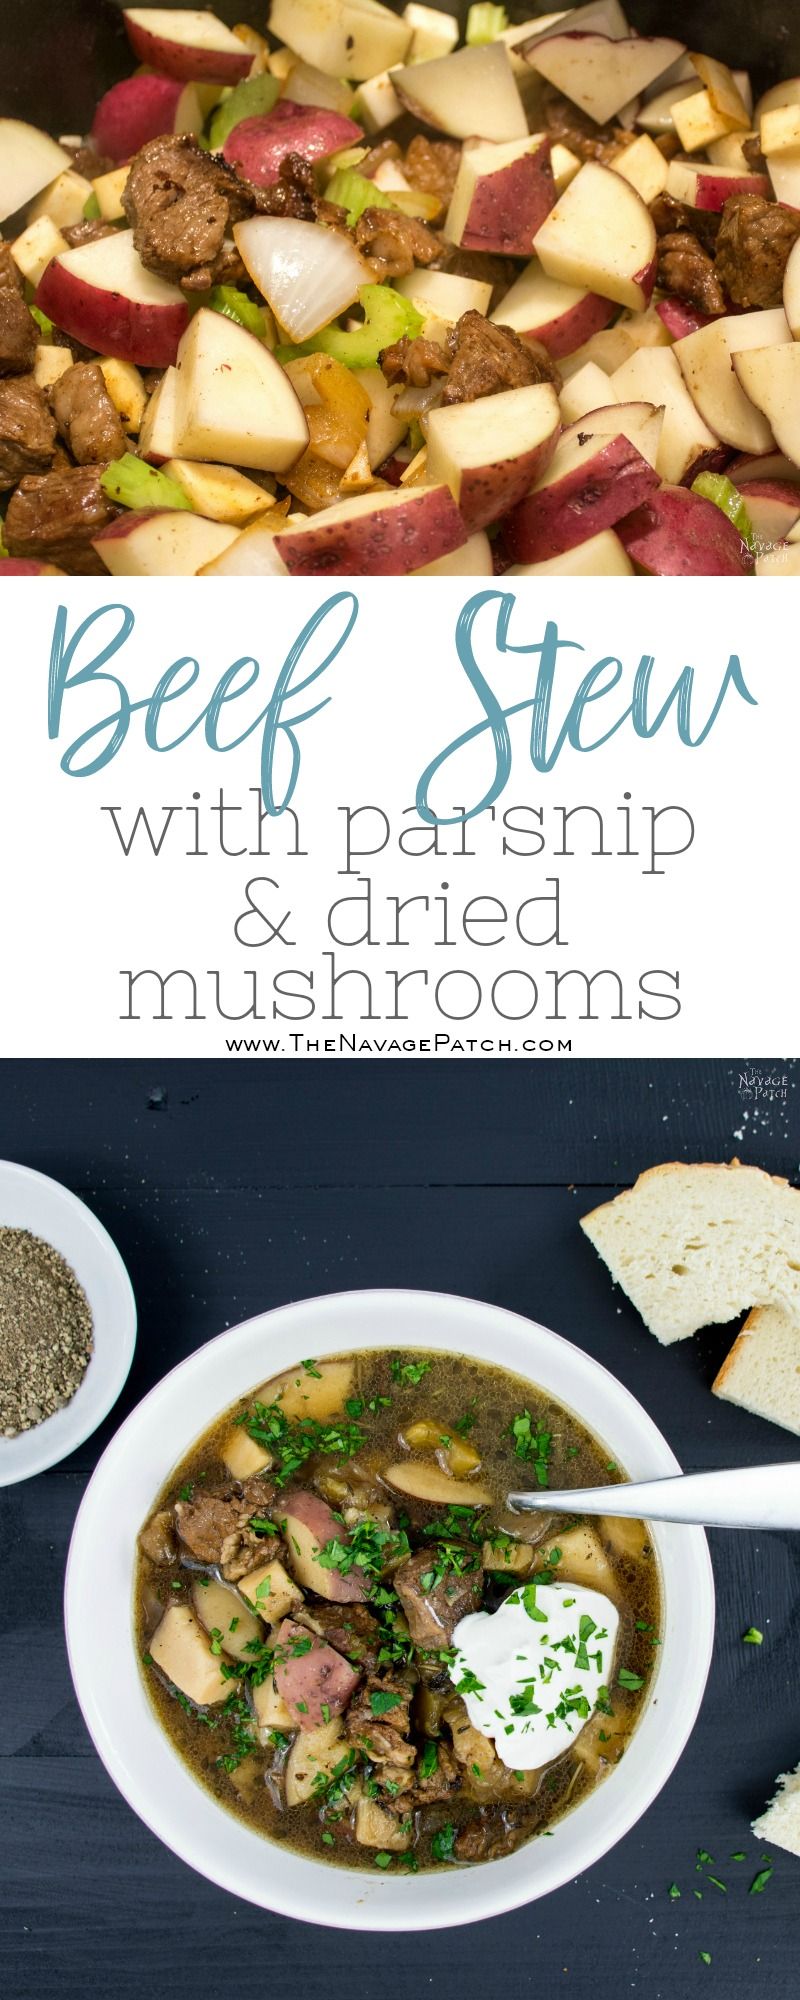 Beef Stew with Parsnips & Dried Mushrooms | TheNavagePatch.com